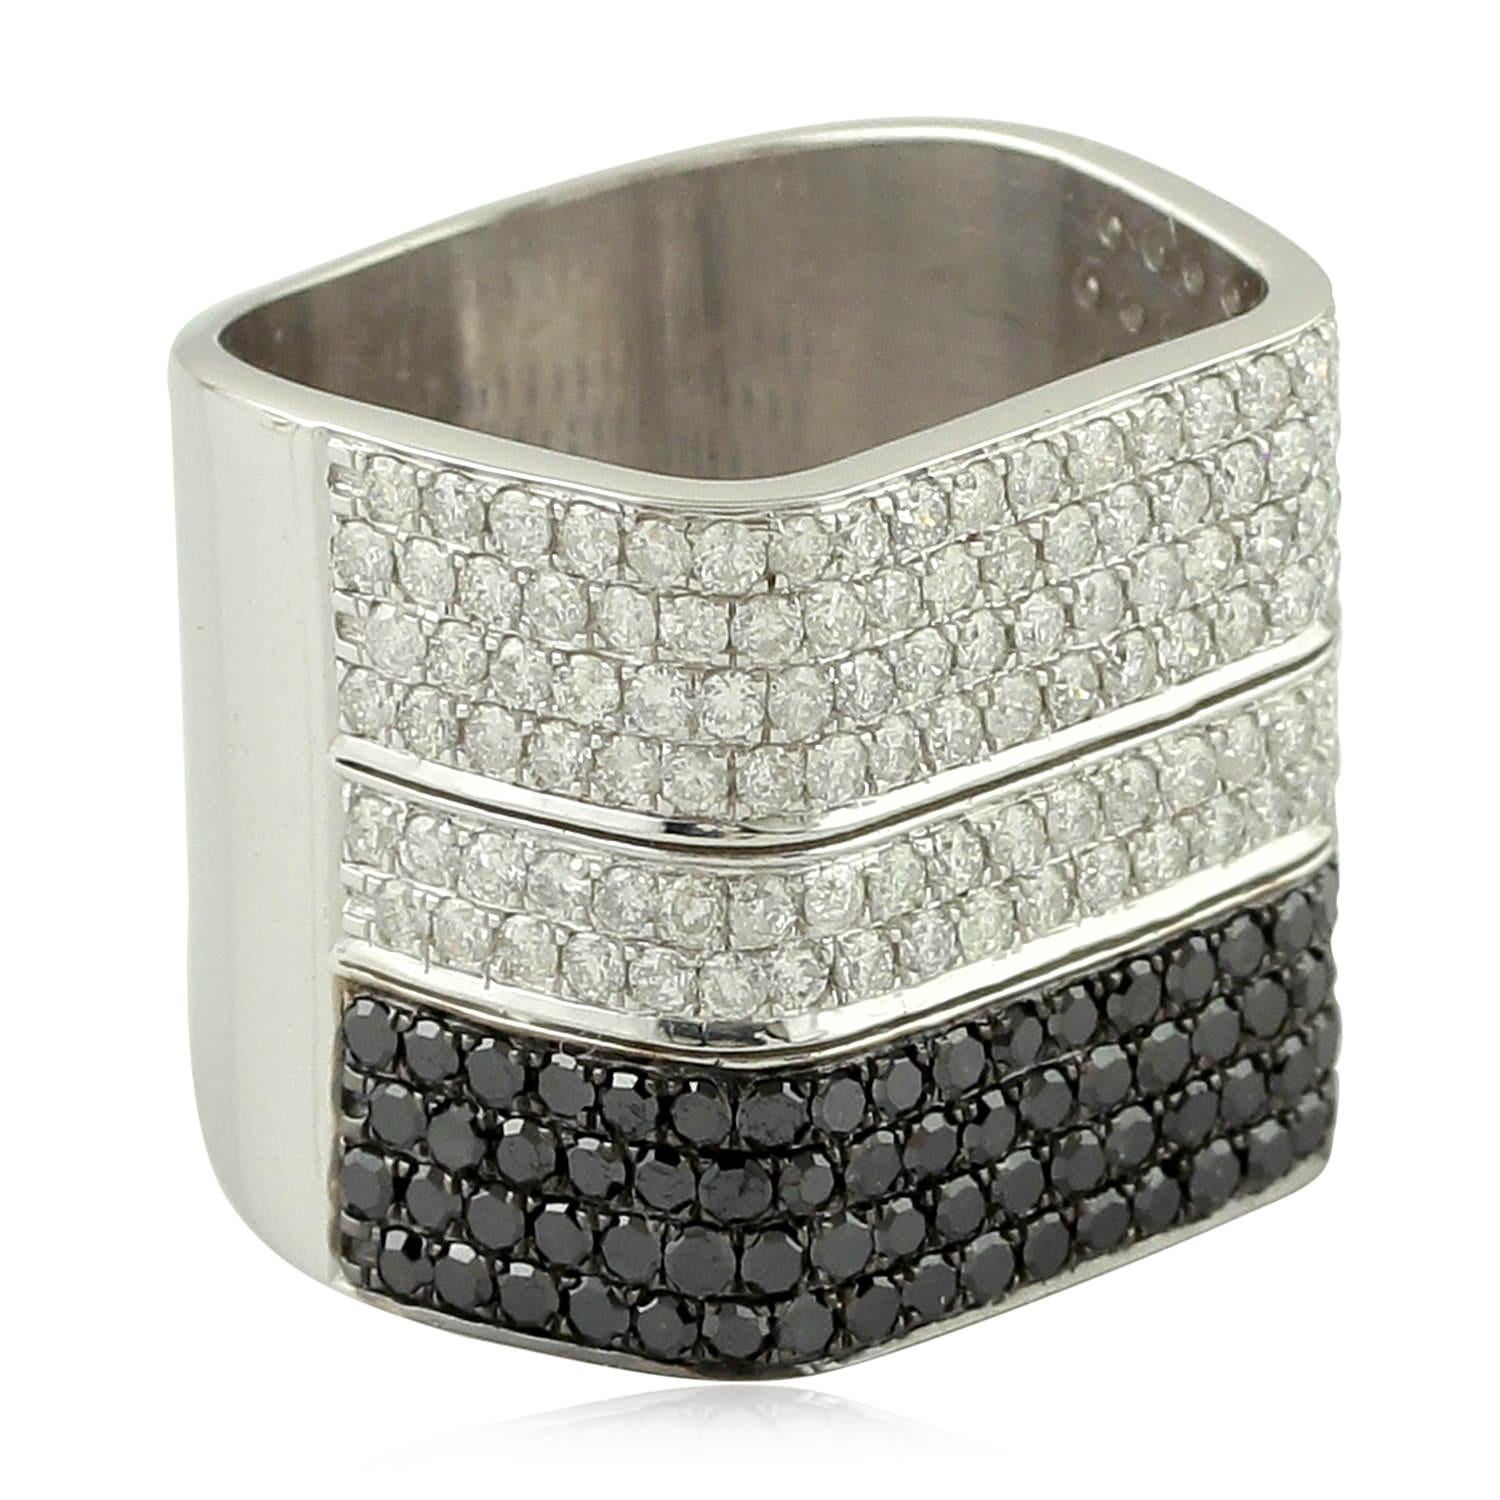 14 Karat White Gold 2.89 Carat Black and White Round Cut Diamond Pave Band Ring US Size 7

Over 2.5 carats of diamonds! A beautiful wide band, full of sparkle!
2.89 carats of White and Black round brilliant cut diamonds set on each side in 14k White